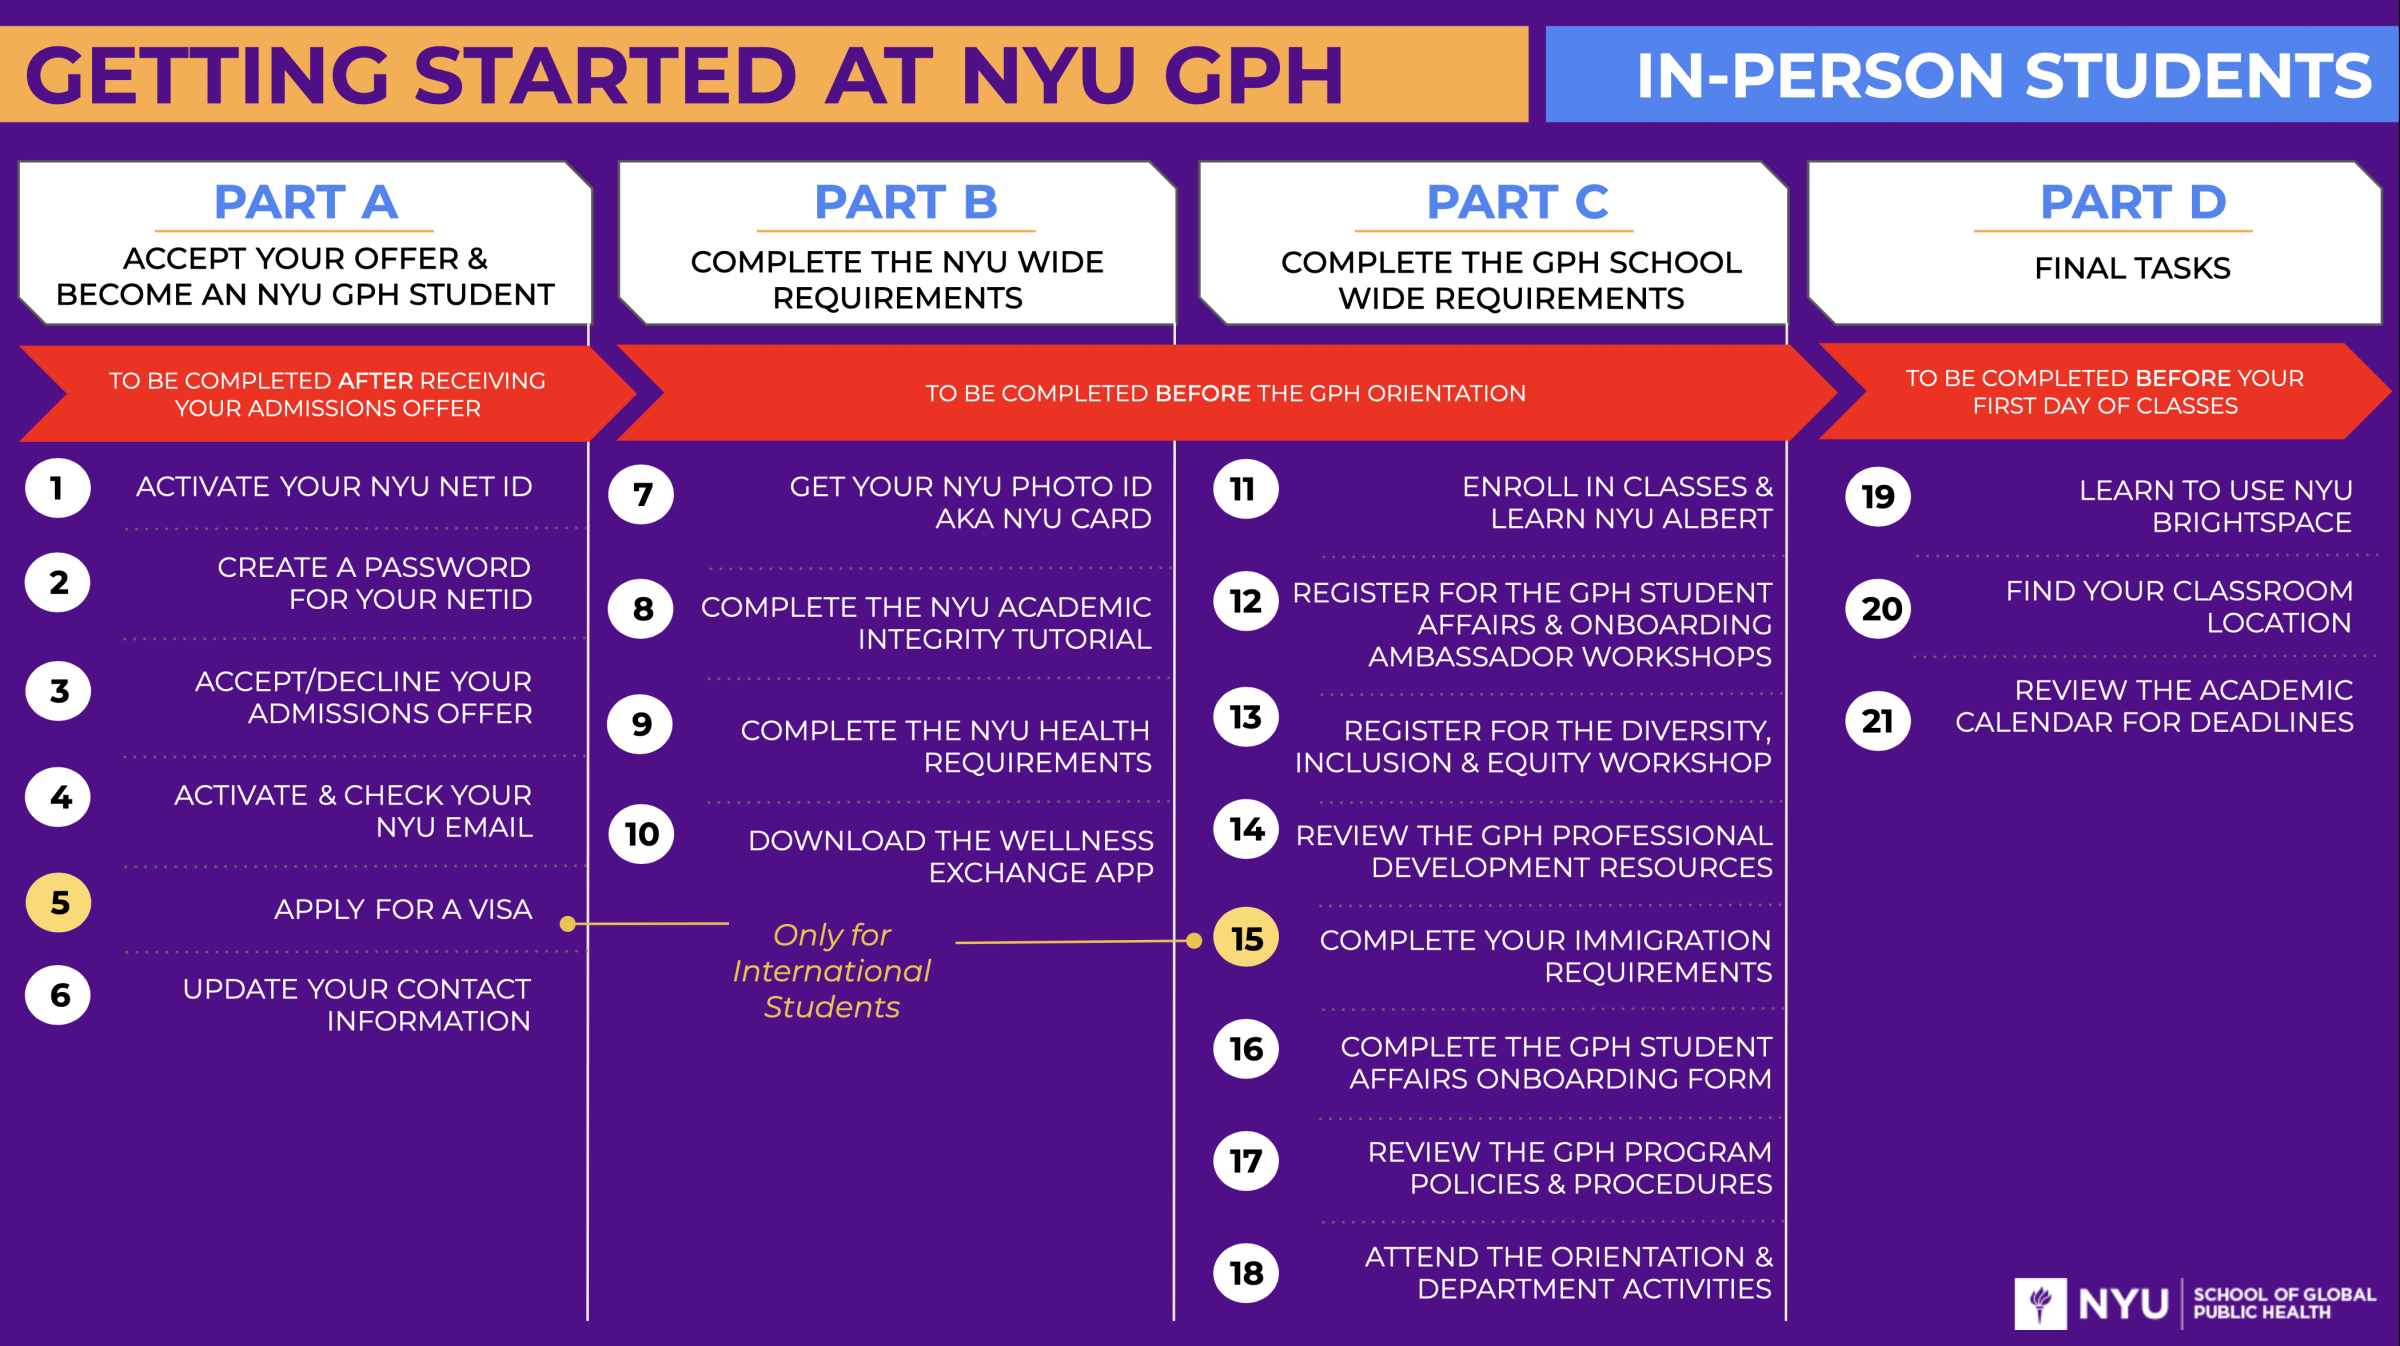 Getting Started at NYU GPH - In-person Students